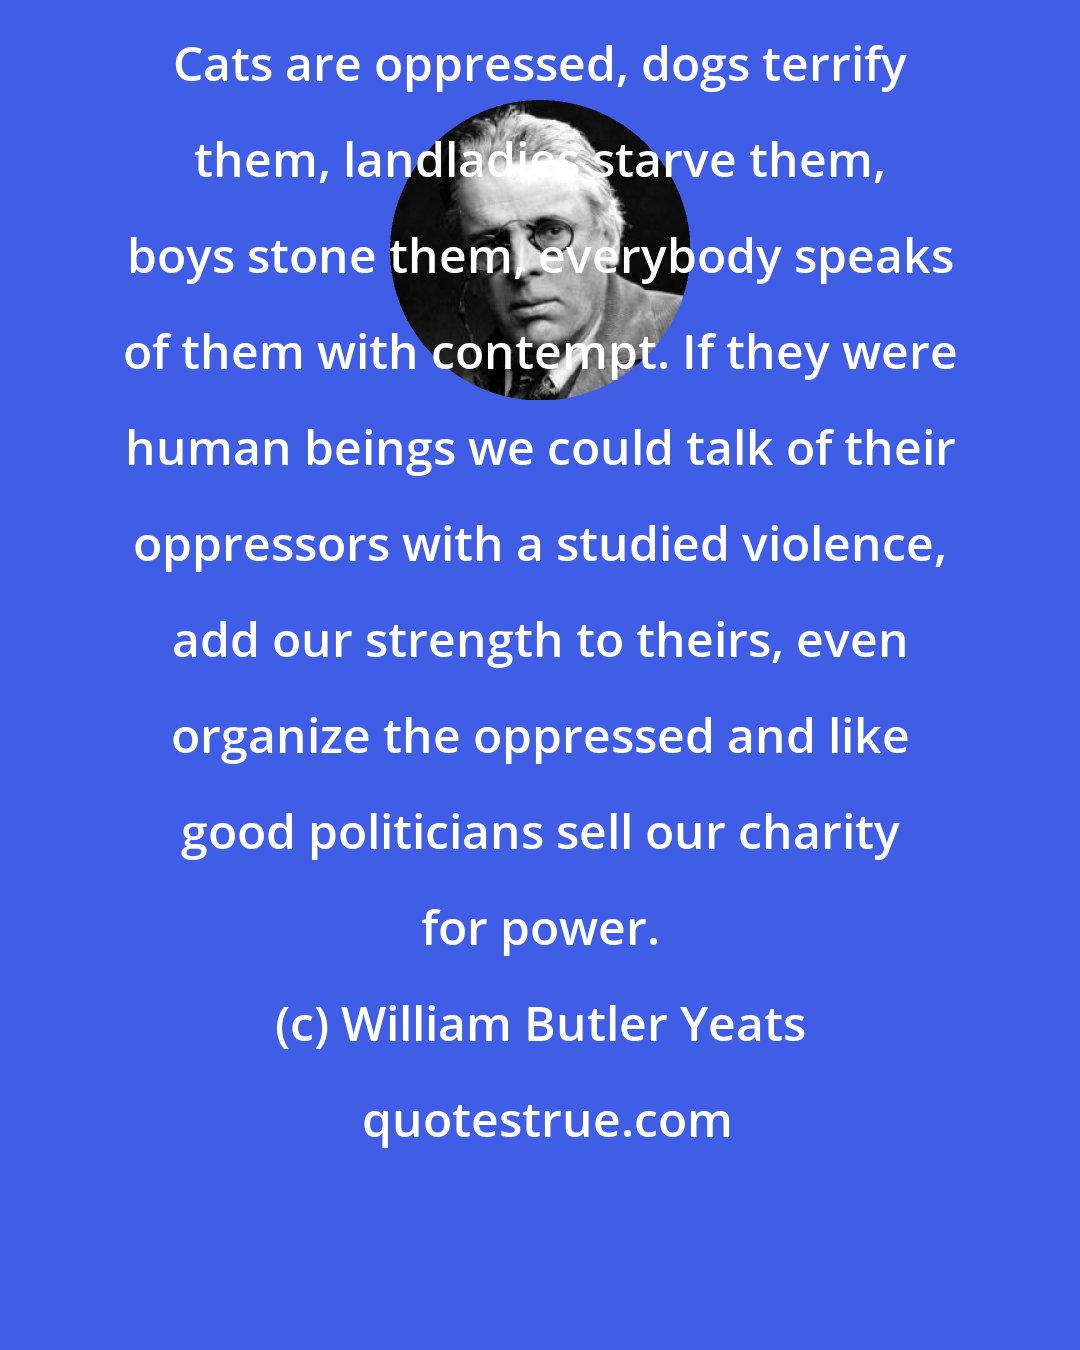 William Butler Yeats: Cats are oppressed, dogs terrify them, landladies starve them, boys stone them, everybody speaks of them with contempt. If they were human beings we could talk of their oppressors with a studied violence, add our strength to theirs, even organize the oppressed and like good politicians sell our charity for power.